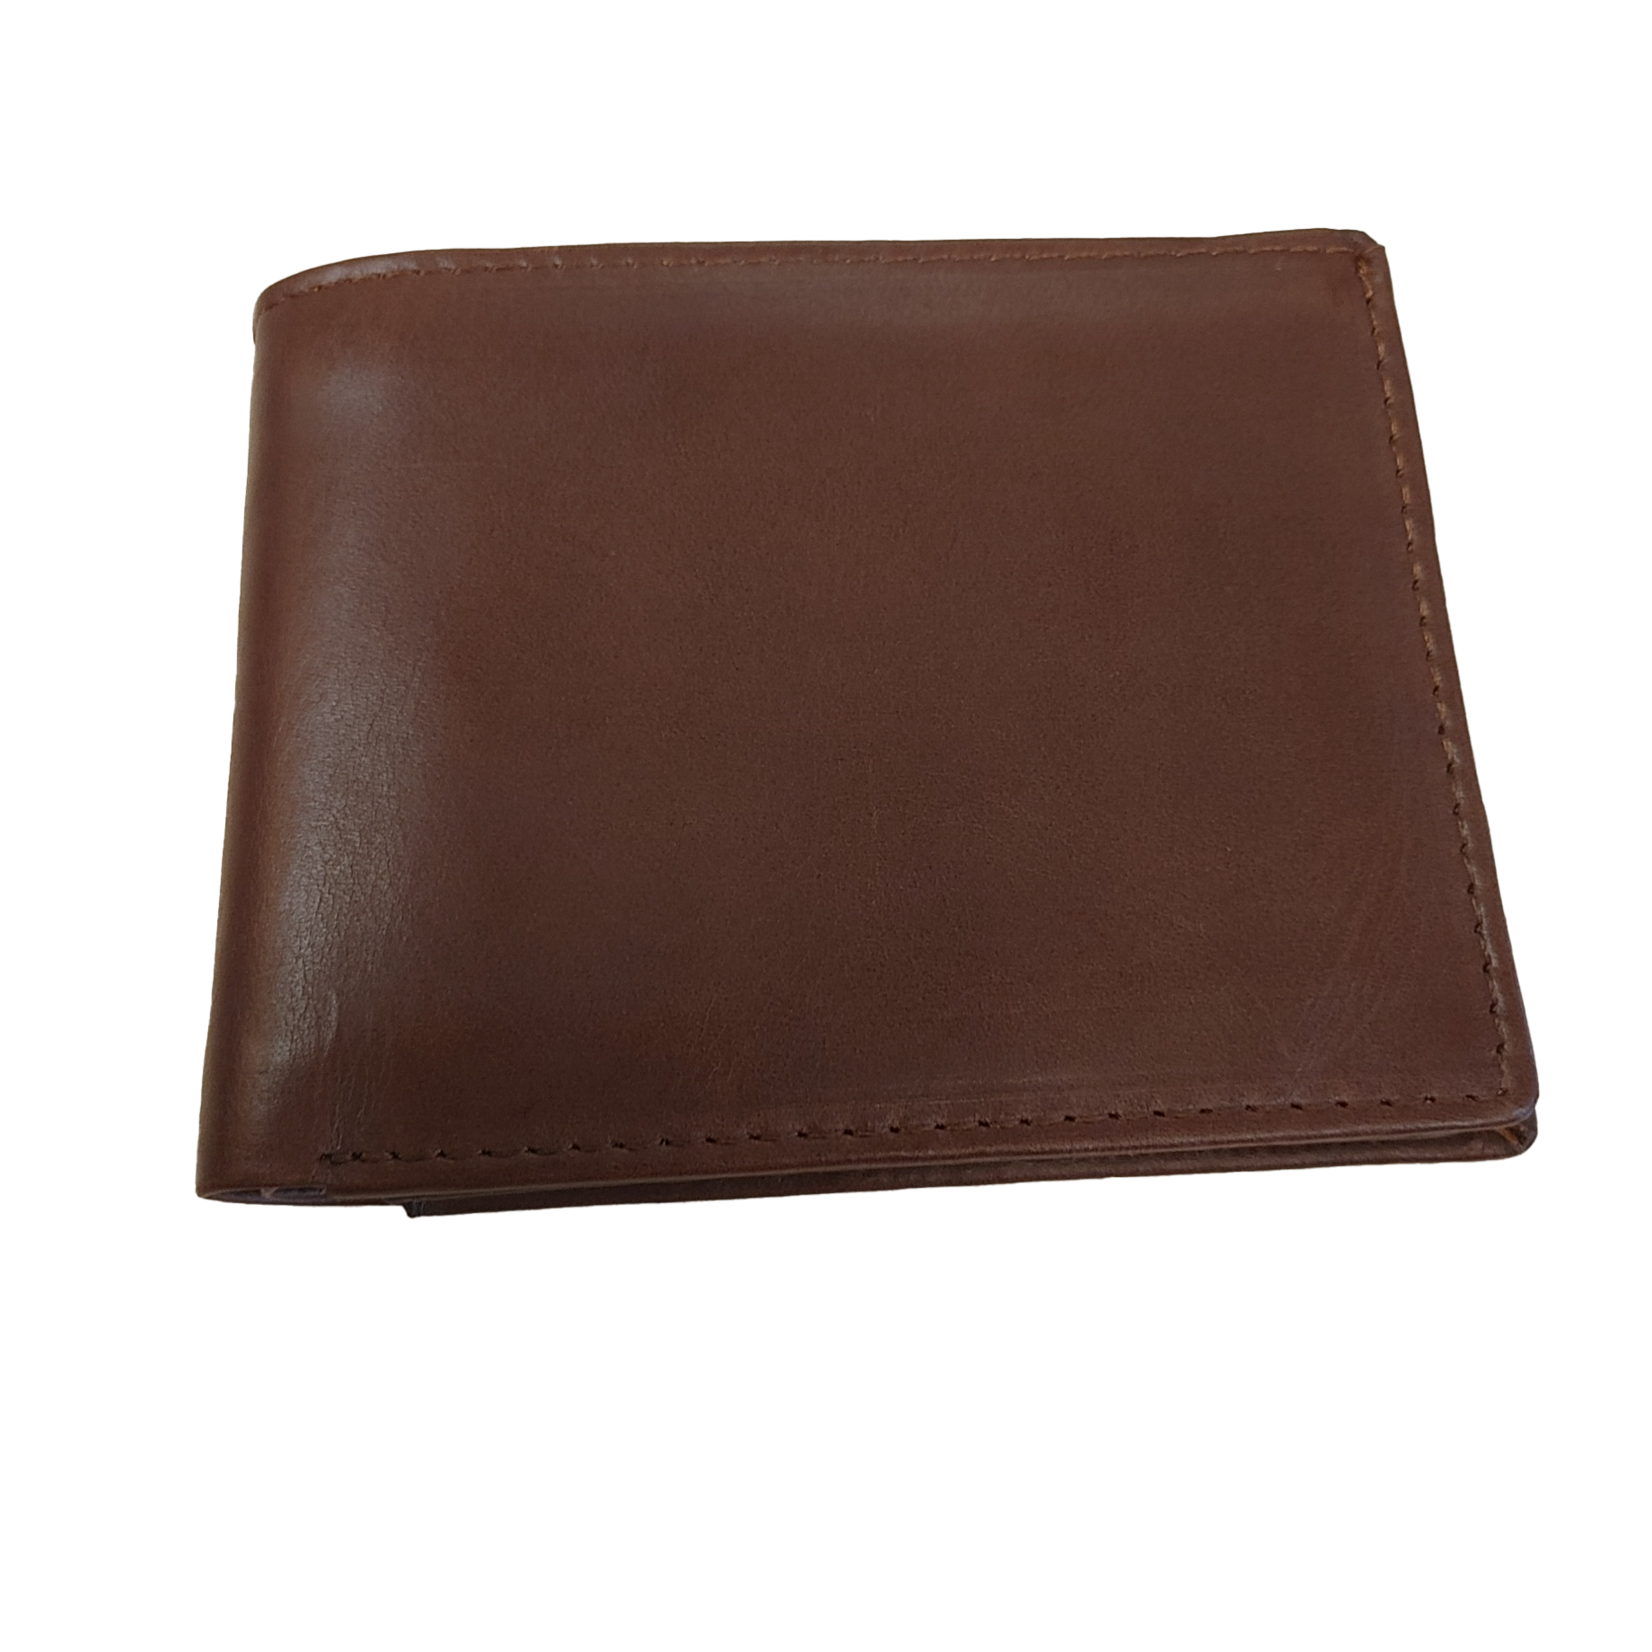 Carlo G RFID cow hide leather wallet